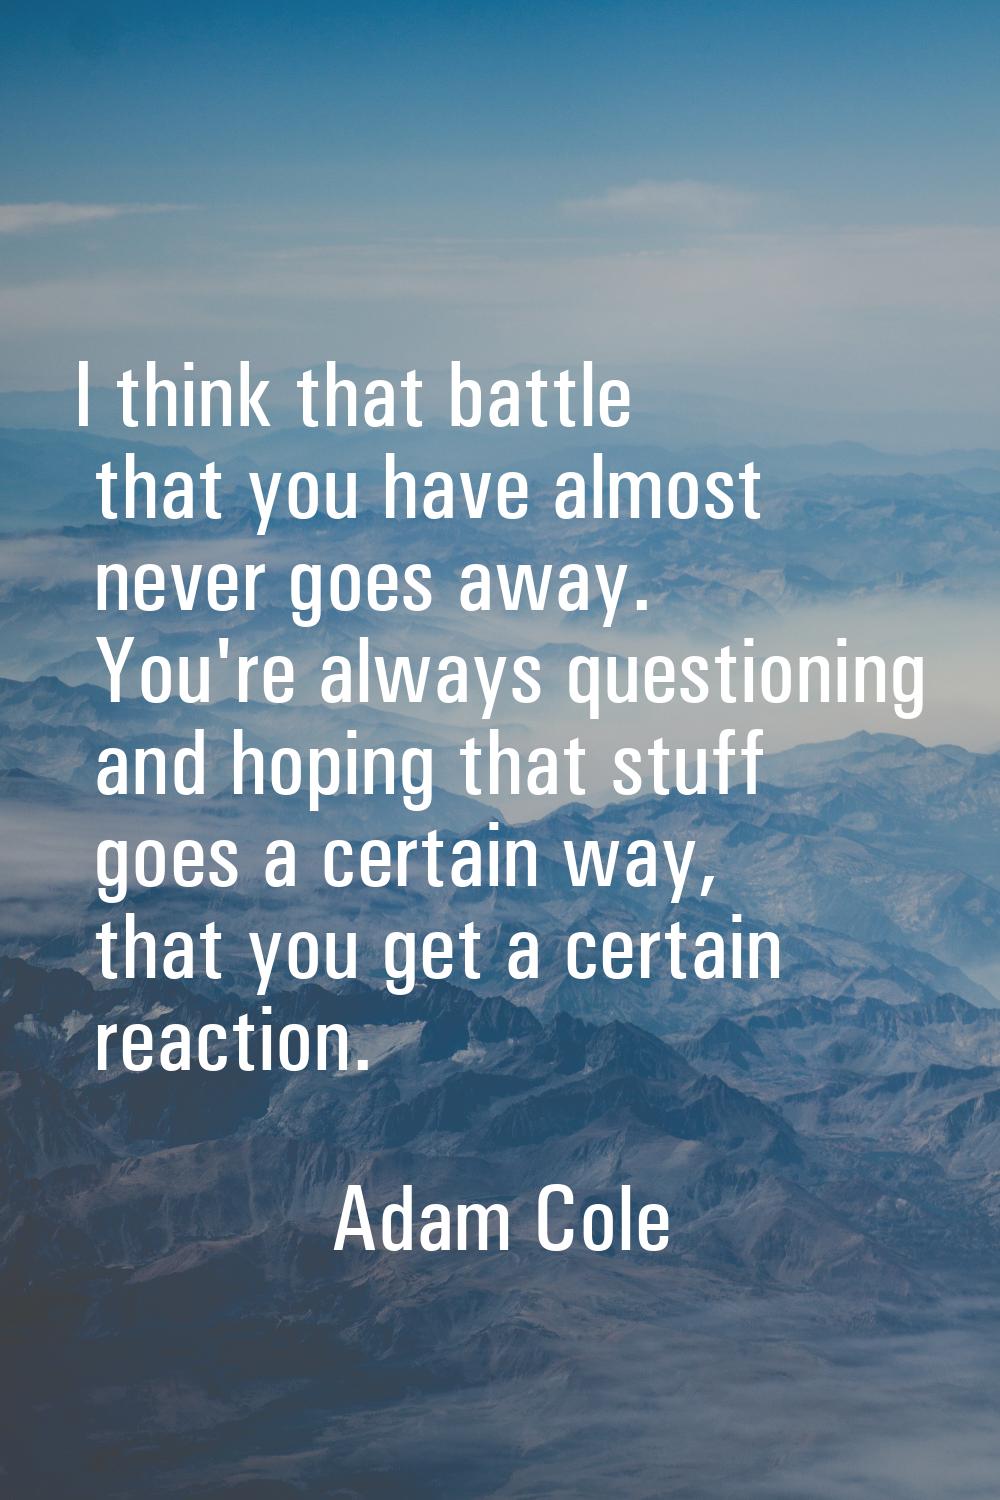 I think that battle that you have almost never goes away. You're always questioning and hoping that